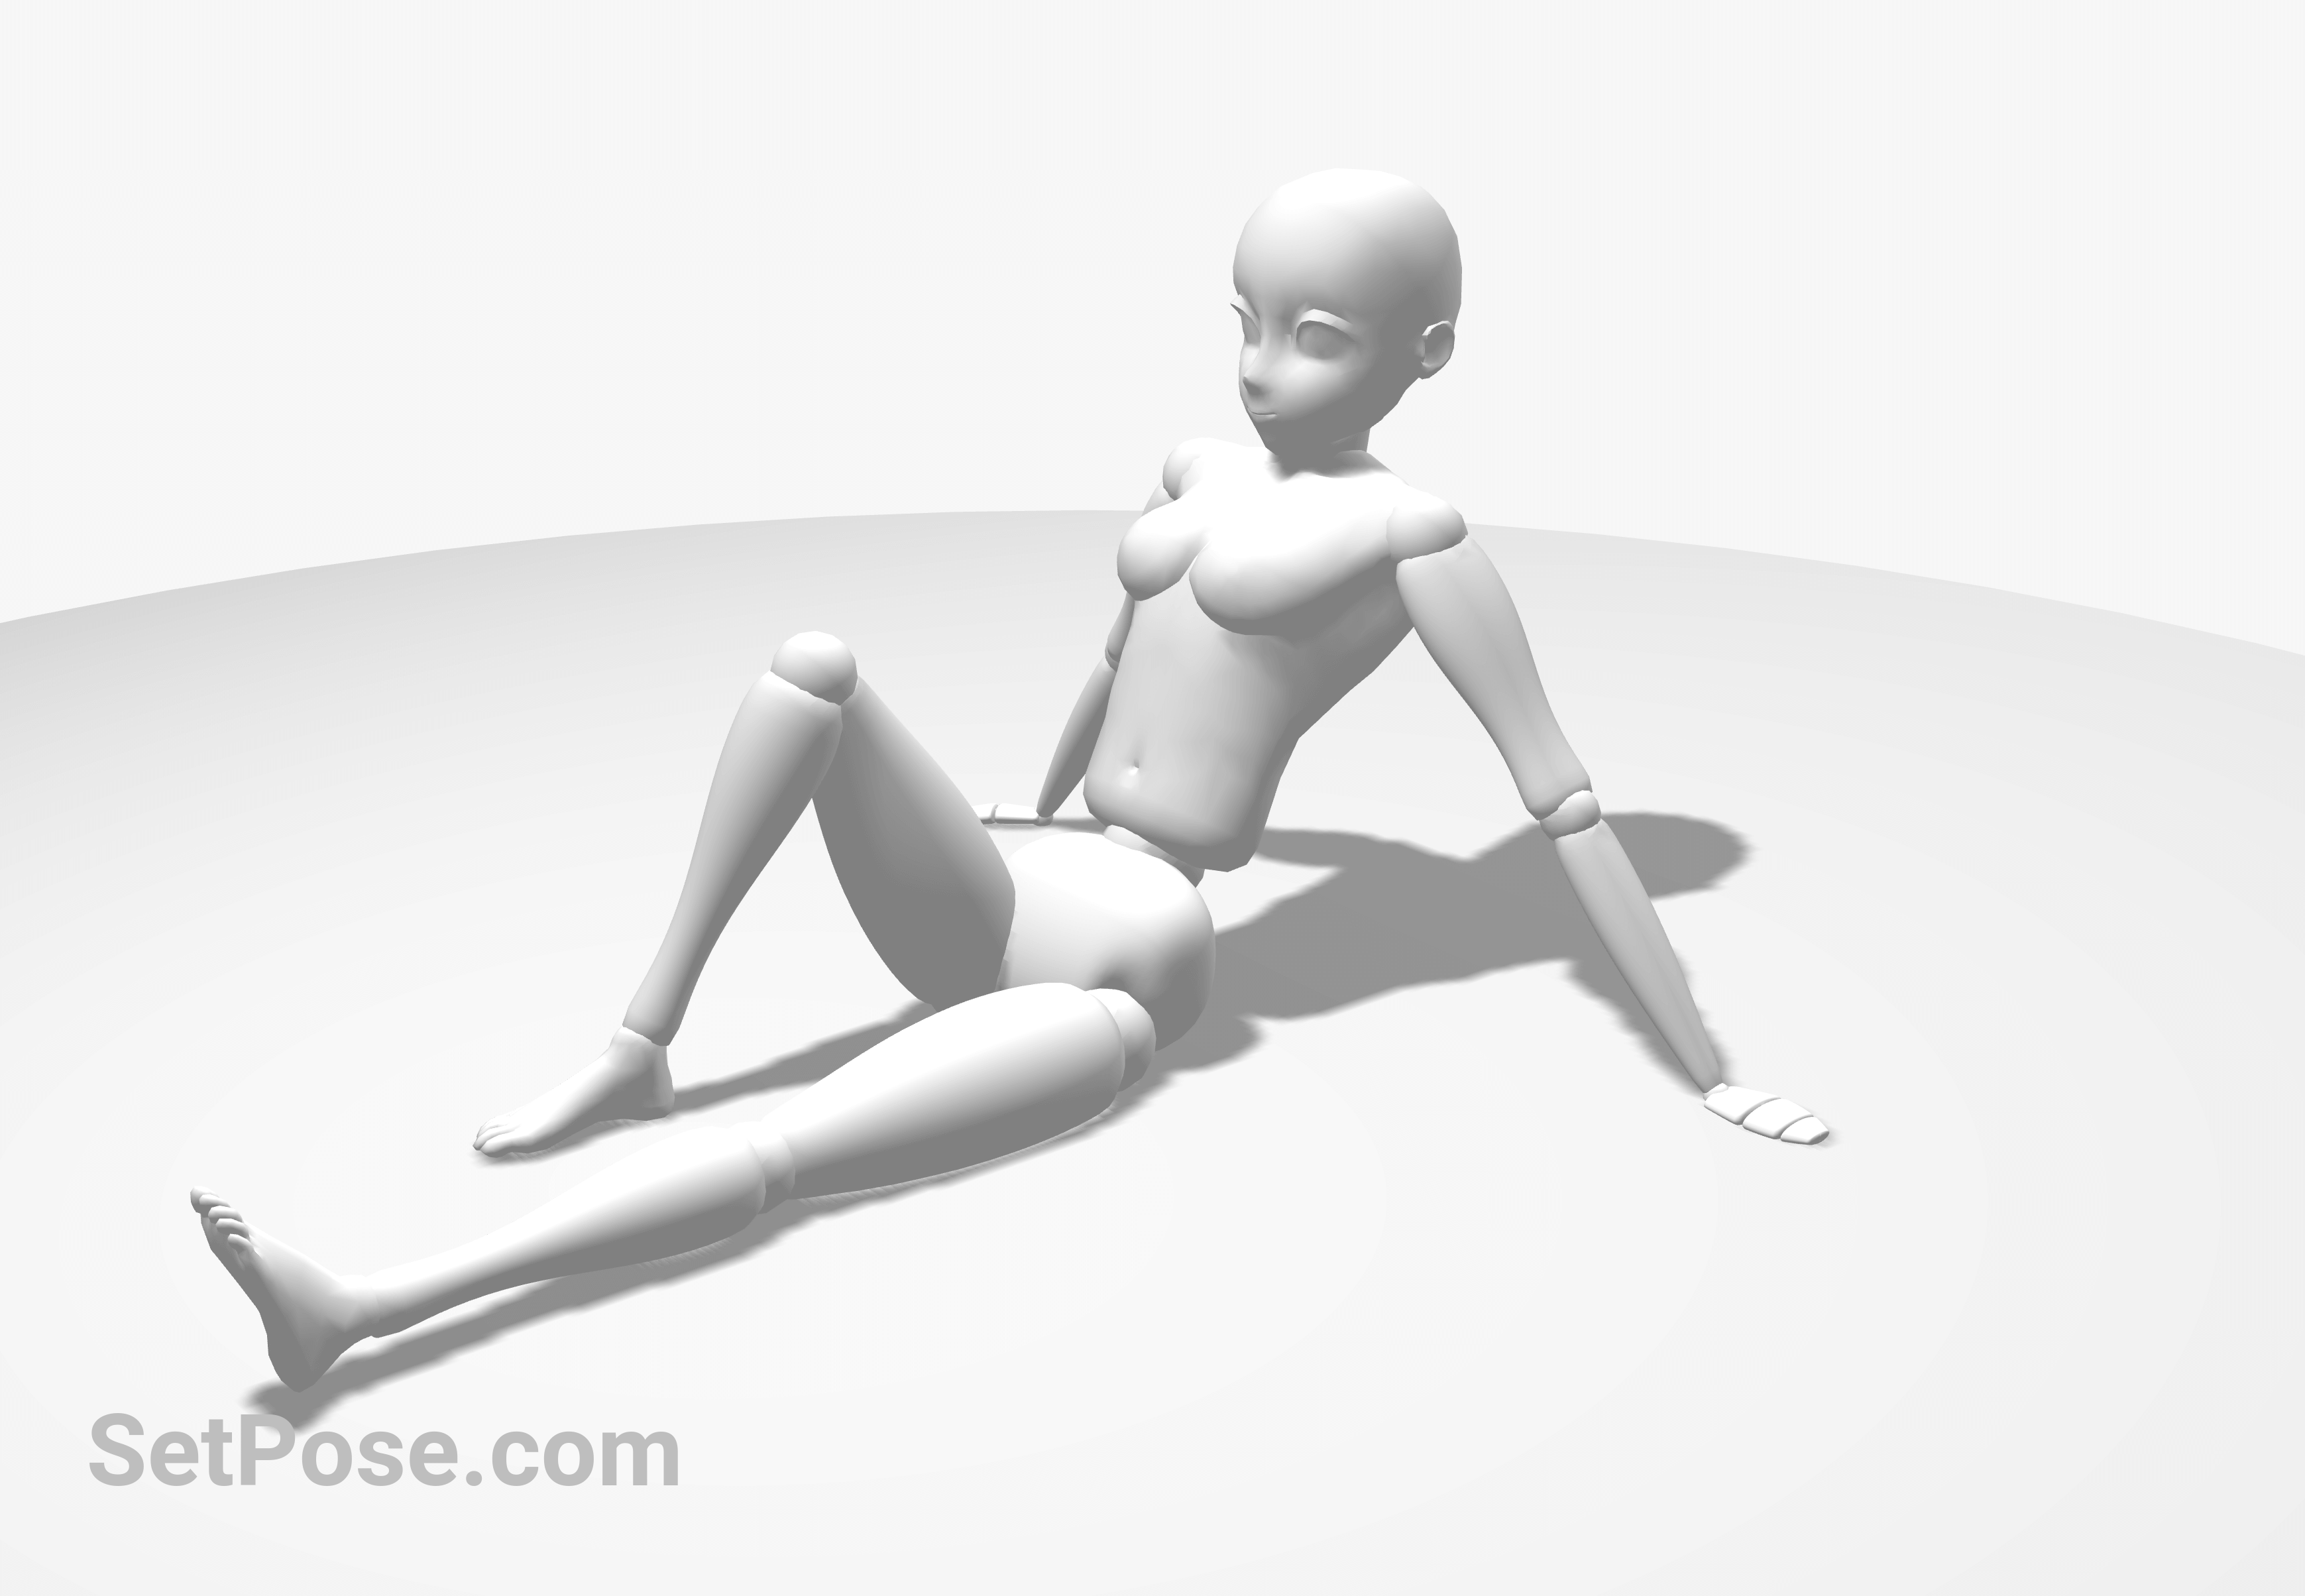 ANIMATIONS: Lying Down, Casual Sitting - Art + Animations - Episode Forums